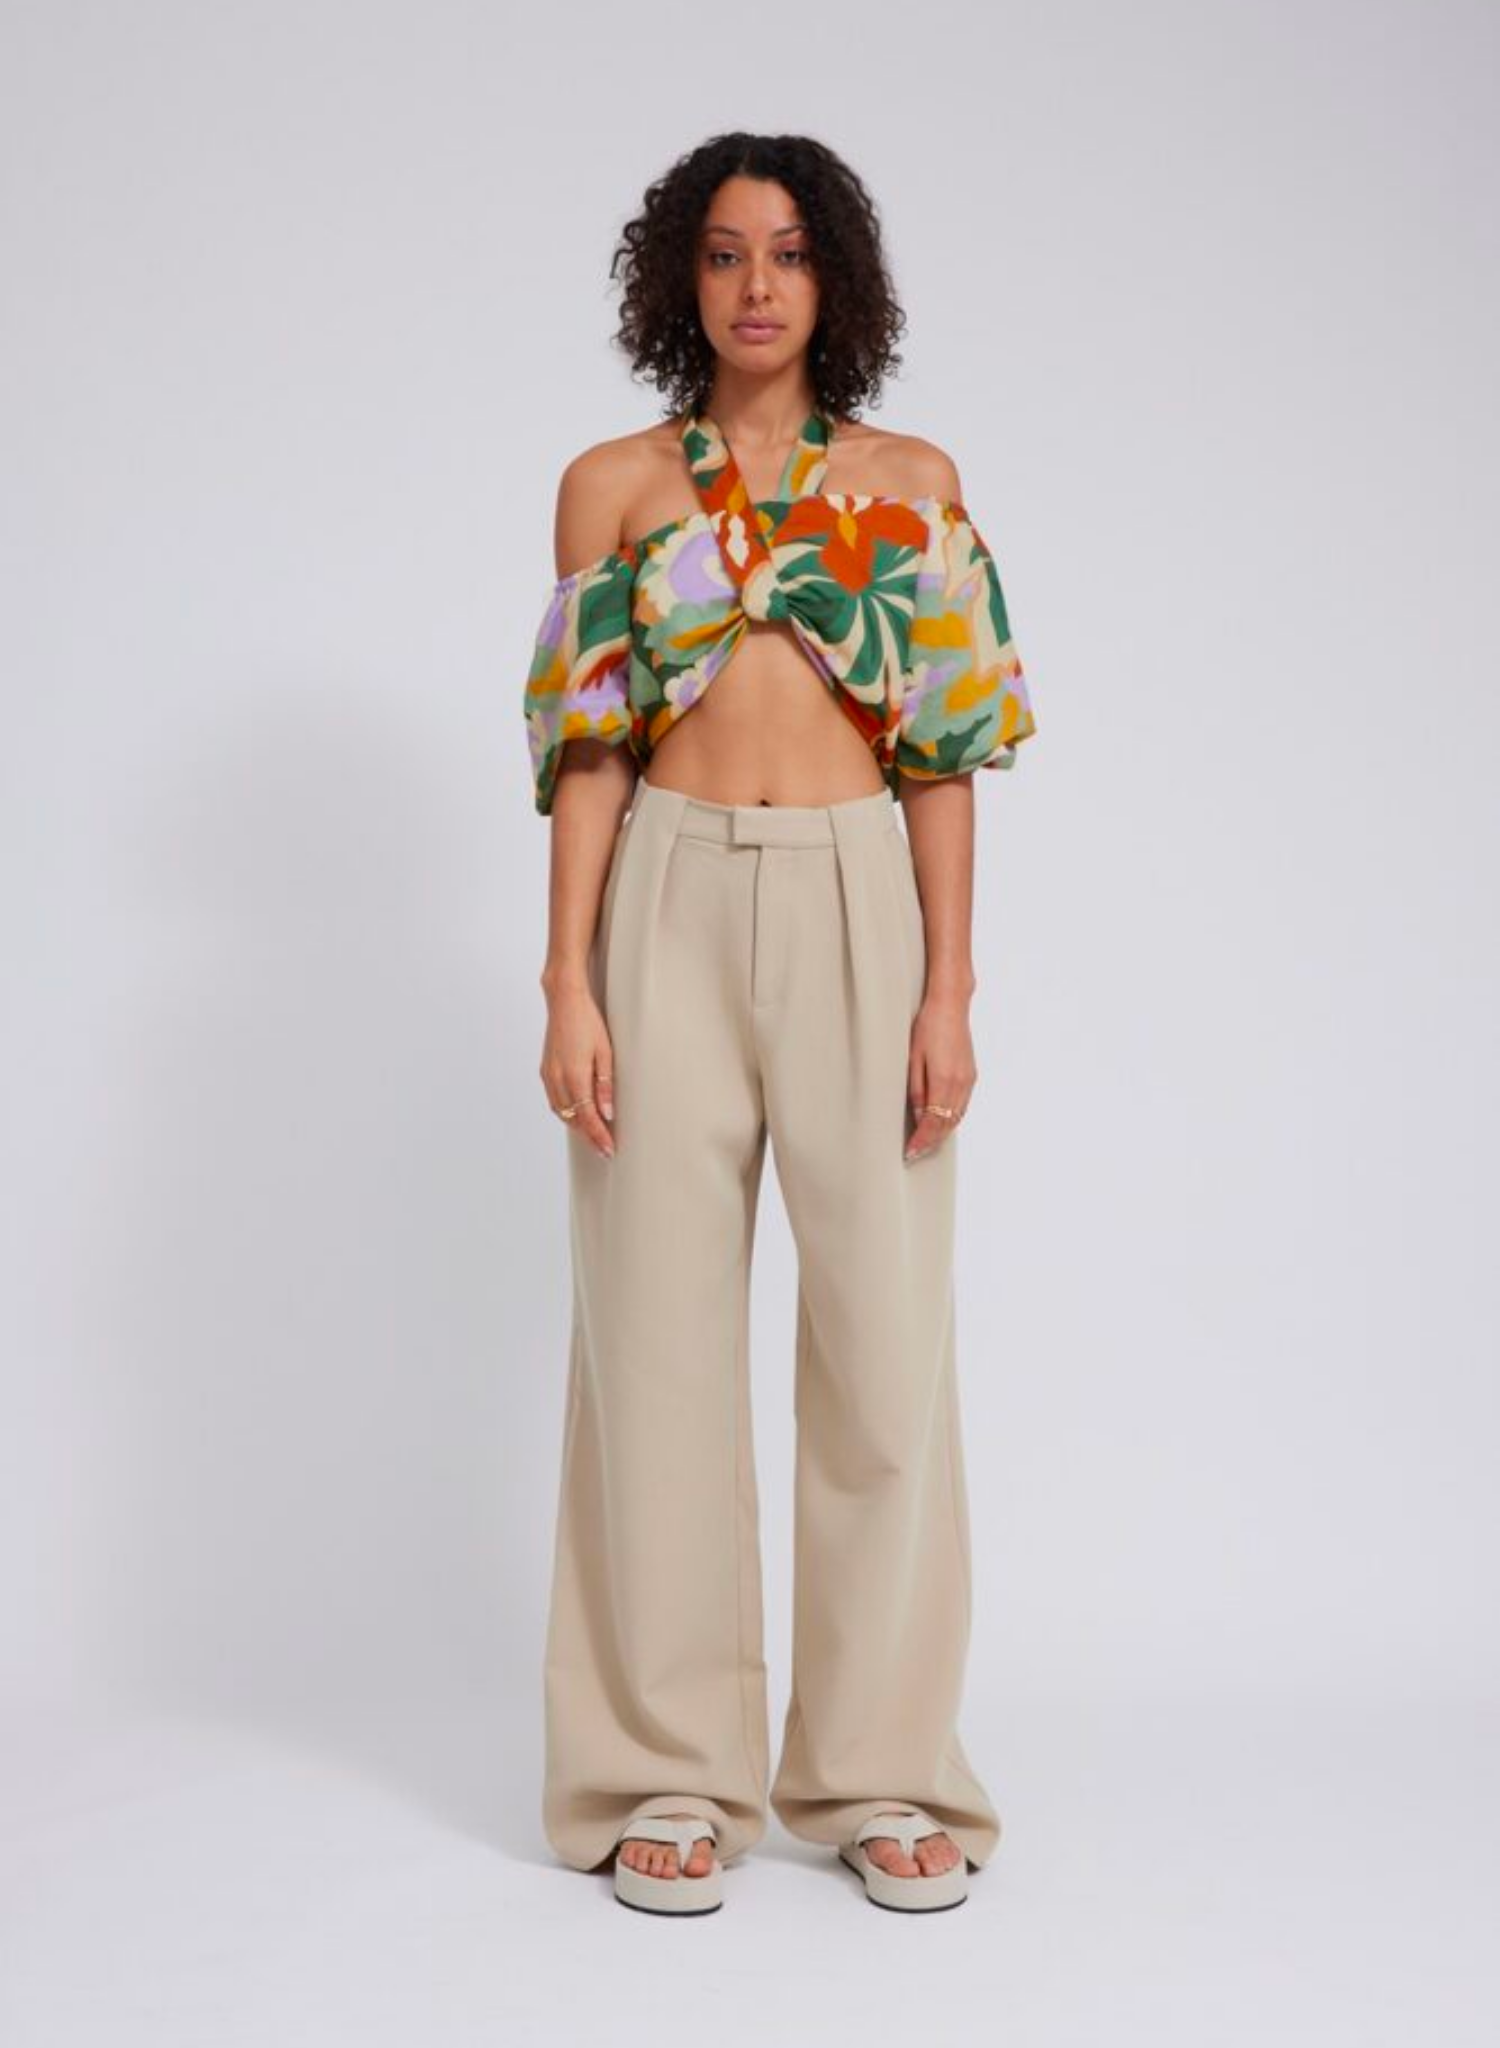 Full length slouchy style suit pant Thick suiting fabrication Designed to be a wide straight leg Waist beltloop tuck detail Pant is unlined Composition: 96% Polyester 4% Spandex